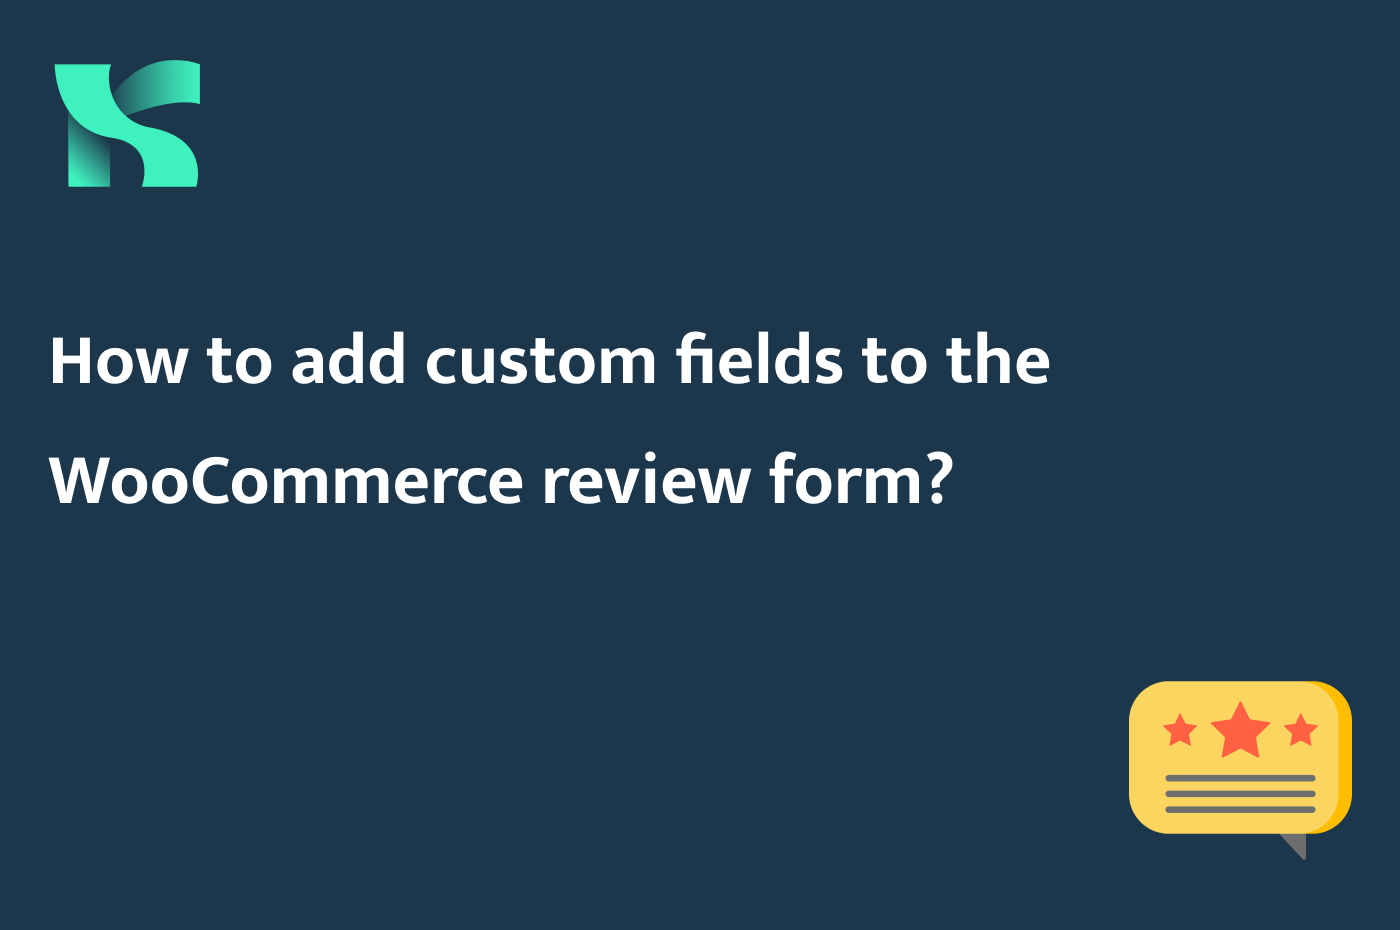 How to add custom fields to the WooCommerce review form?